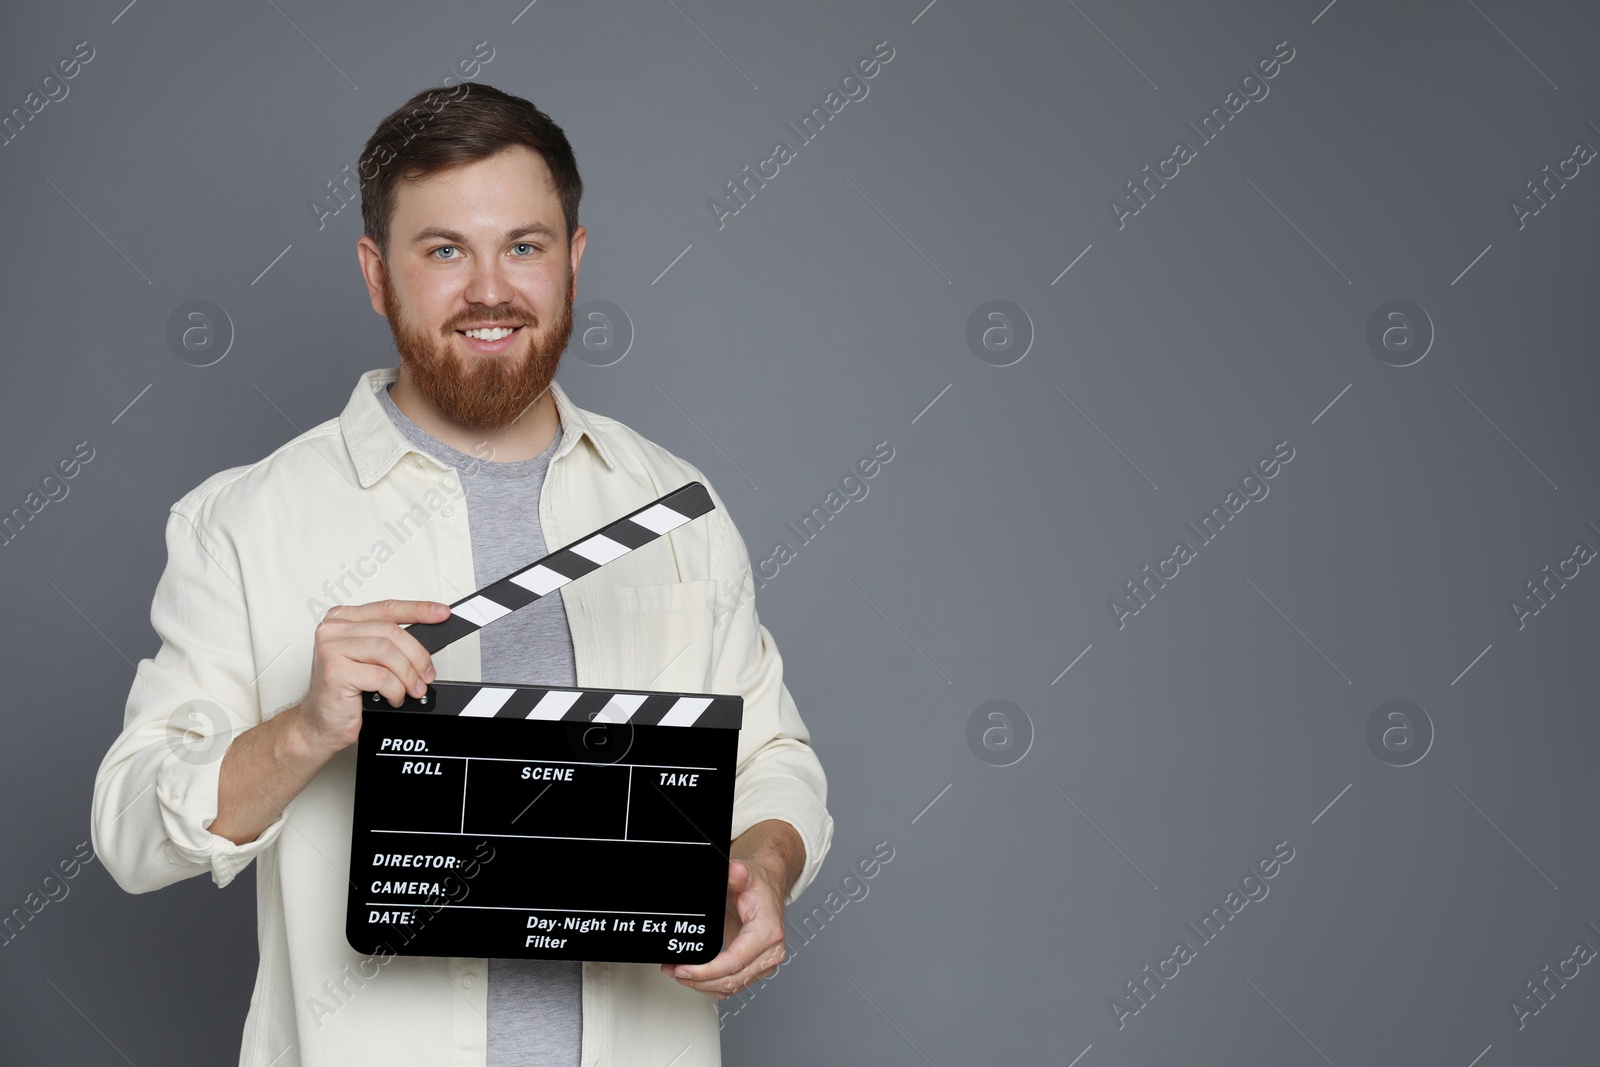 Photo of Making movie. Smiling man with clapperboard on grey background. Space for text